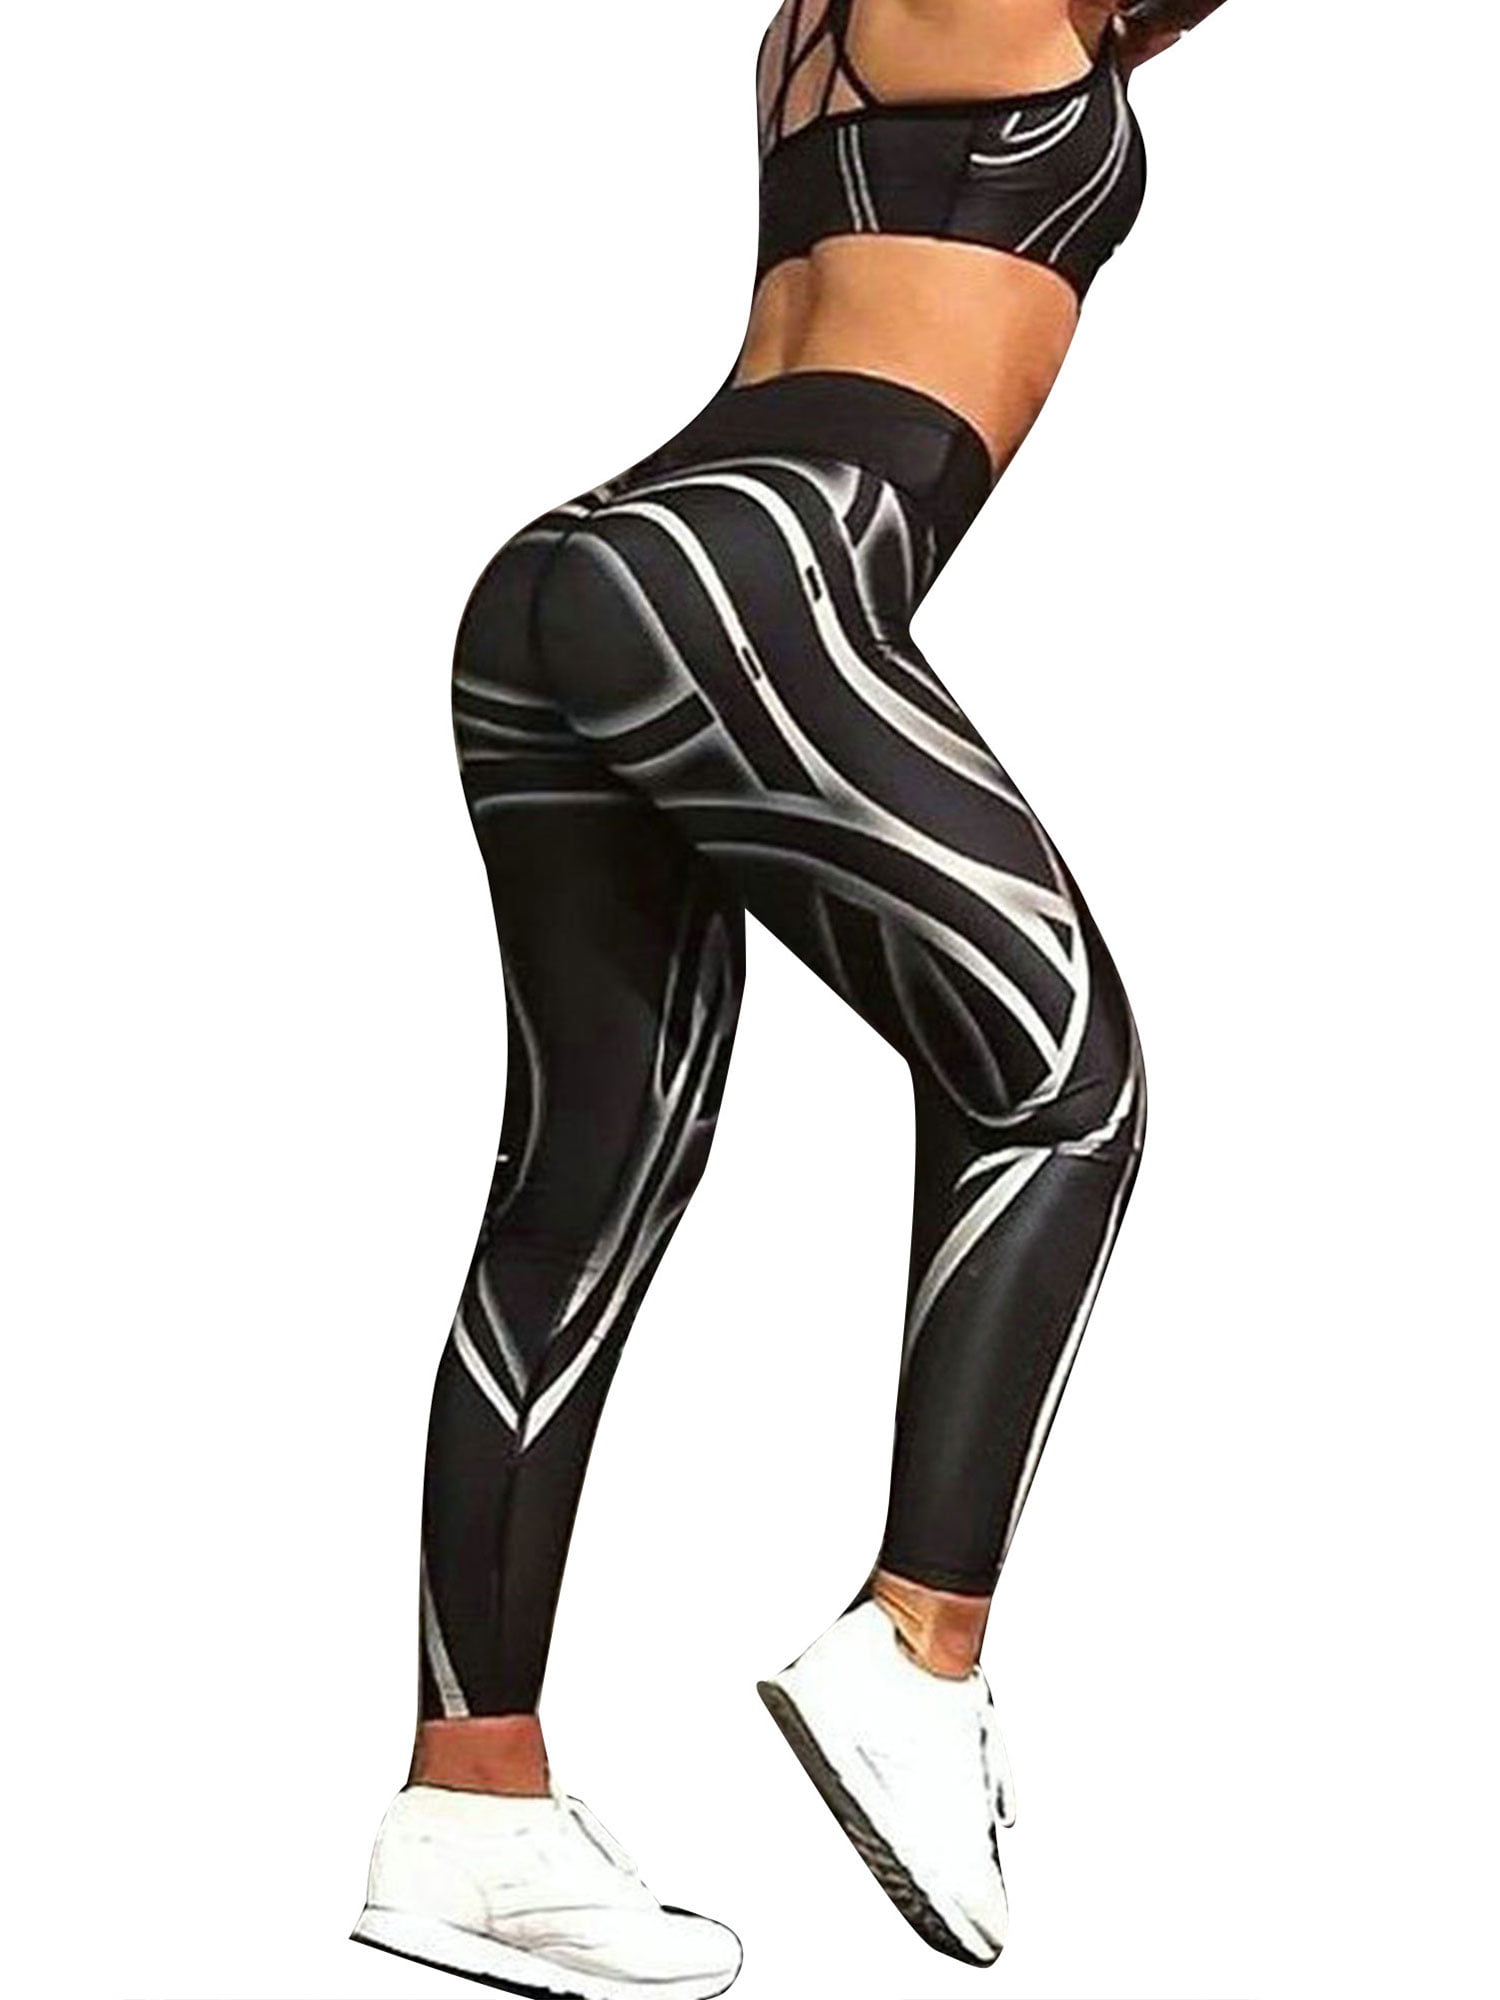 Fitg18® Gym wear Leggings Ankle Length Free Size Combo Workout Trousers